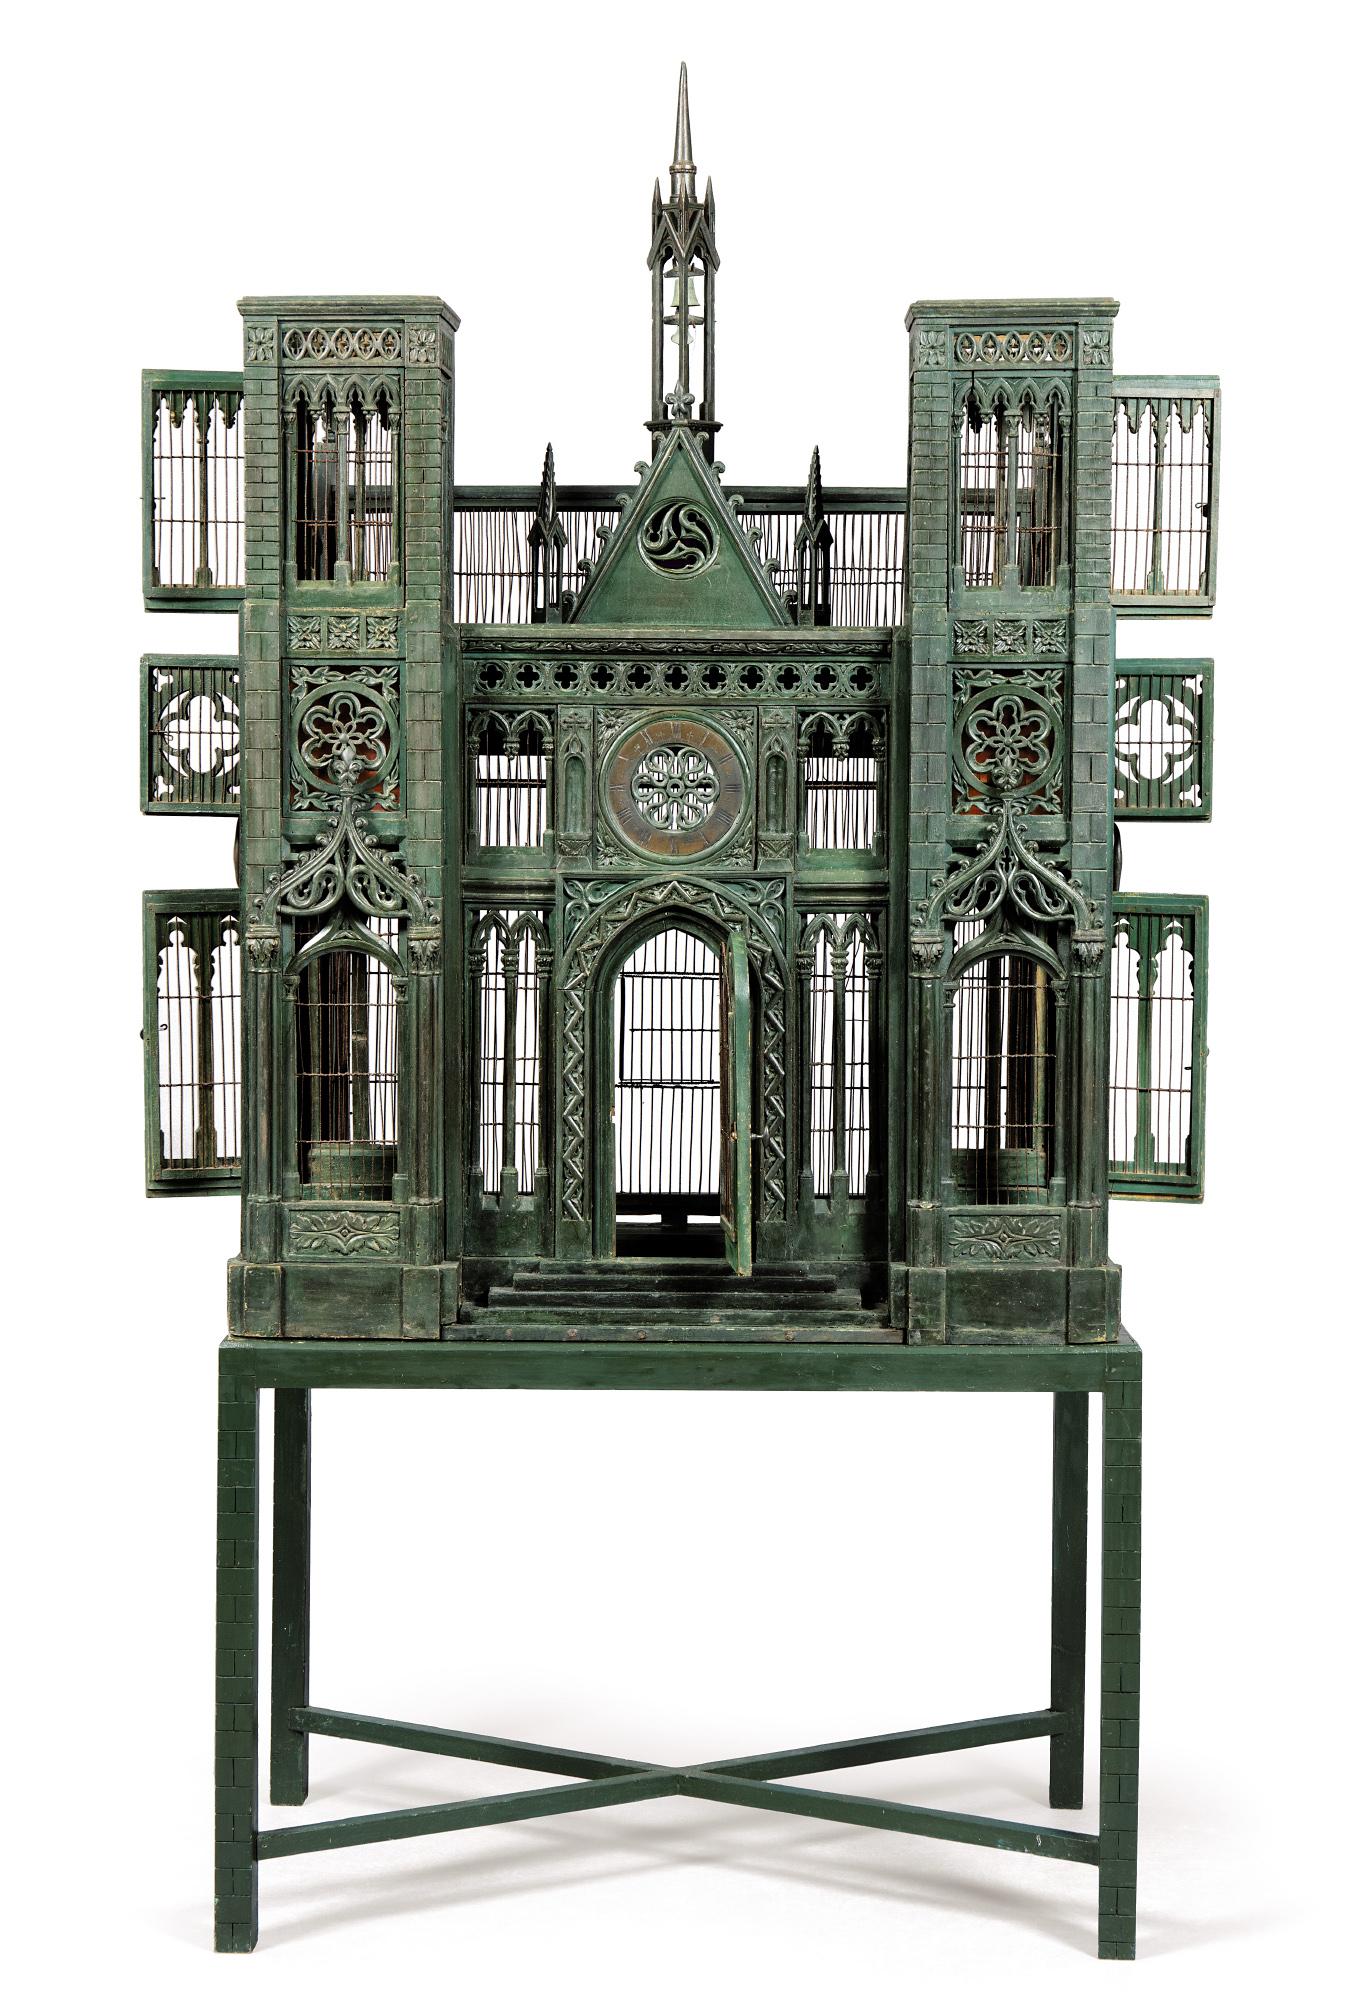 A neo gothic dark green painted Birdcage worked like Notre Dame Notre Dame
Very rare bird cage, neo gothic, dark green painted on a pedestal of later date.
The object is highly decorative and in a good overall condition.
   